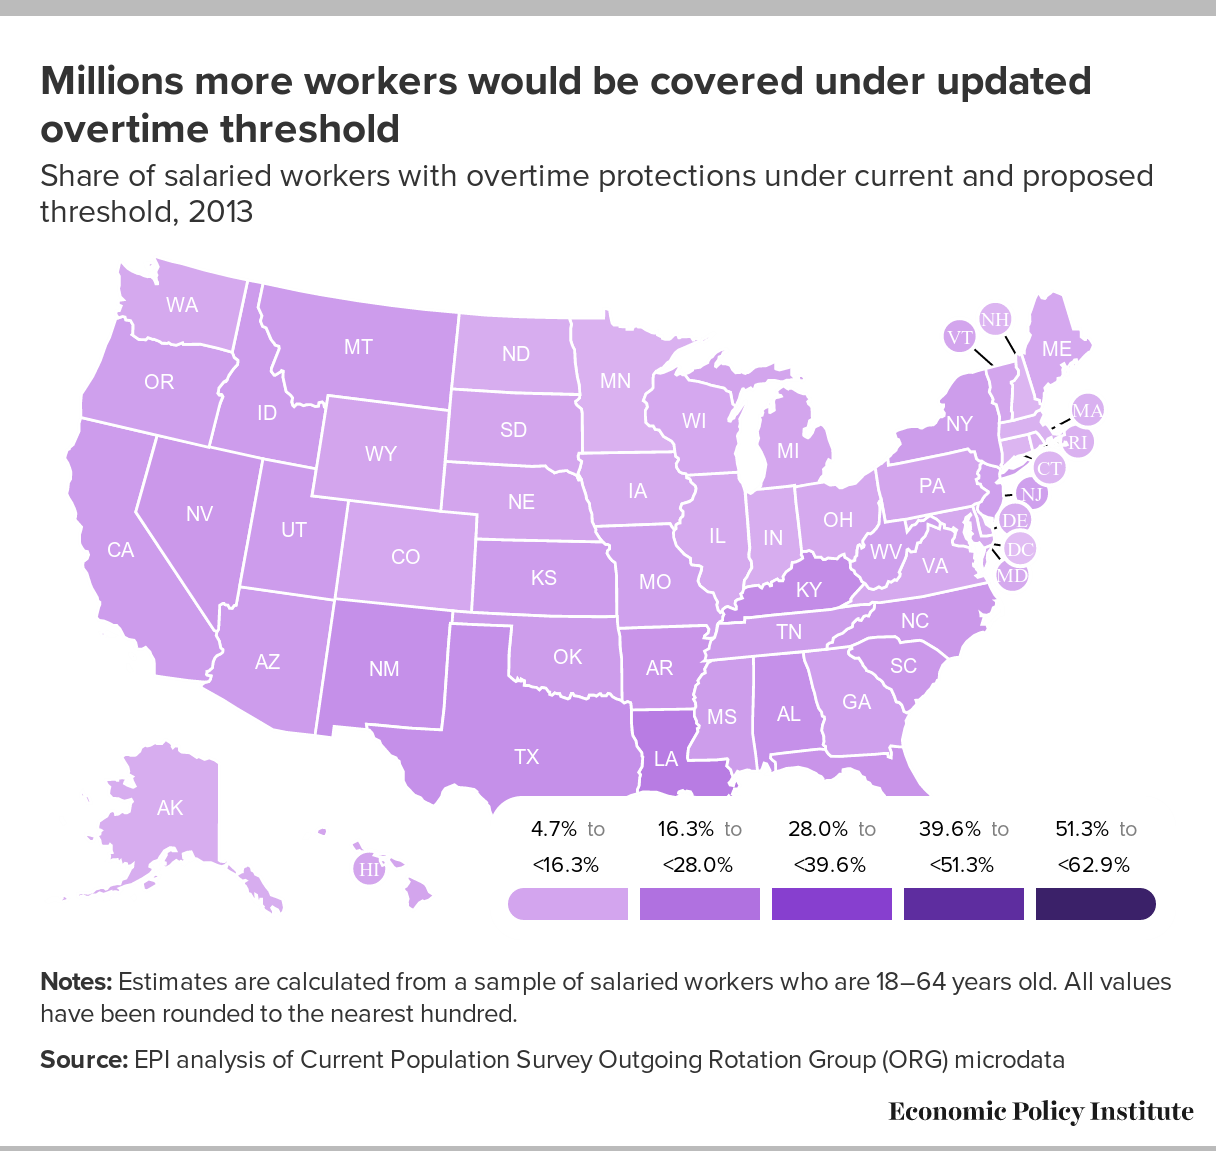 How Many Workers in Your State Would Gain Overtime Protections under an